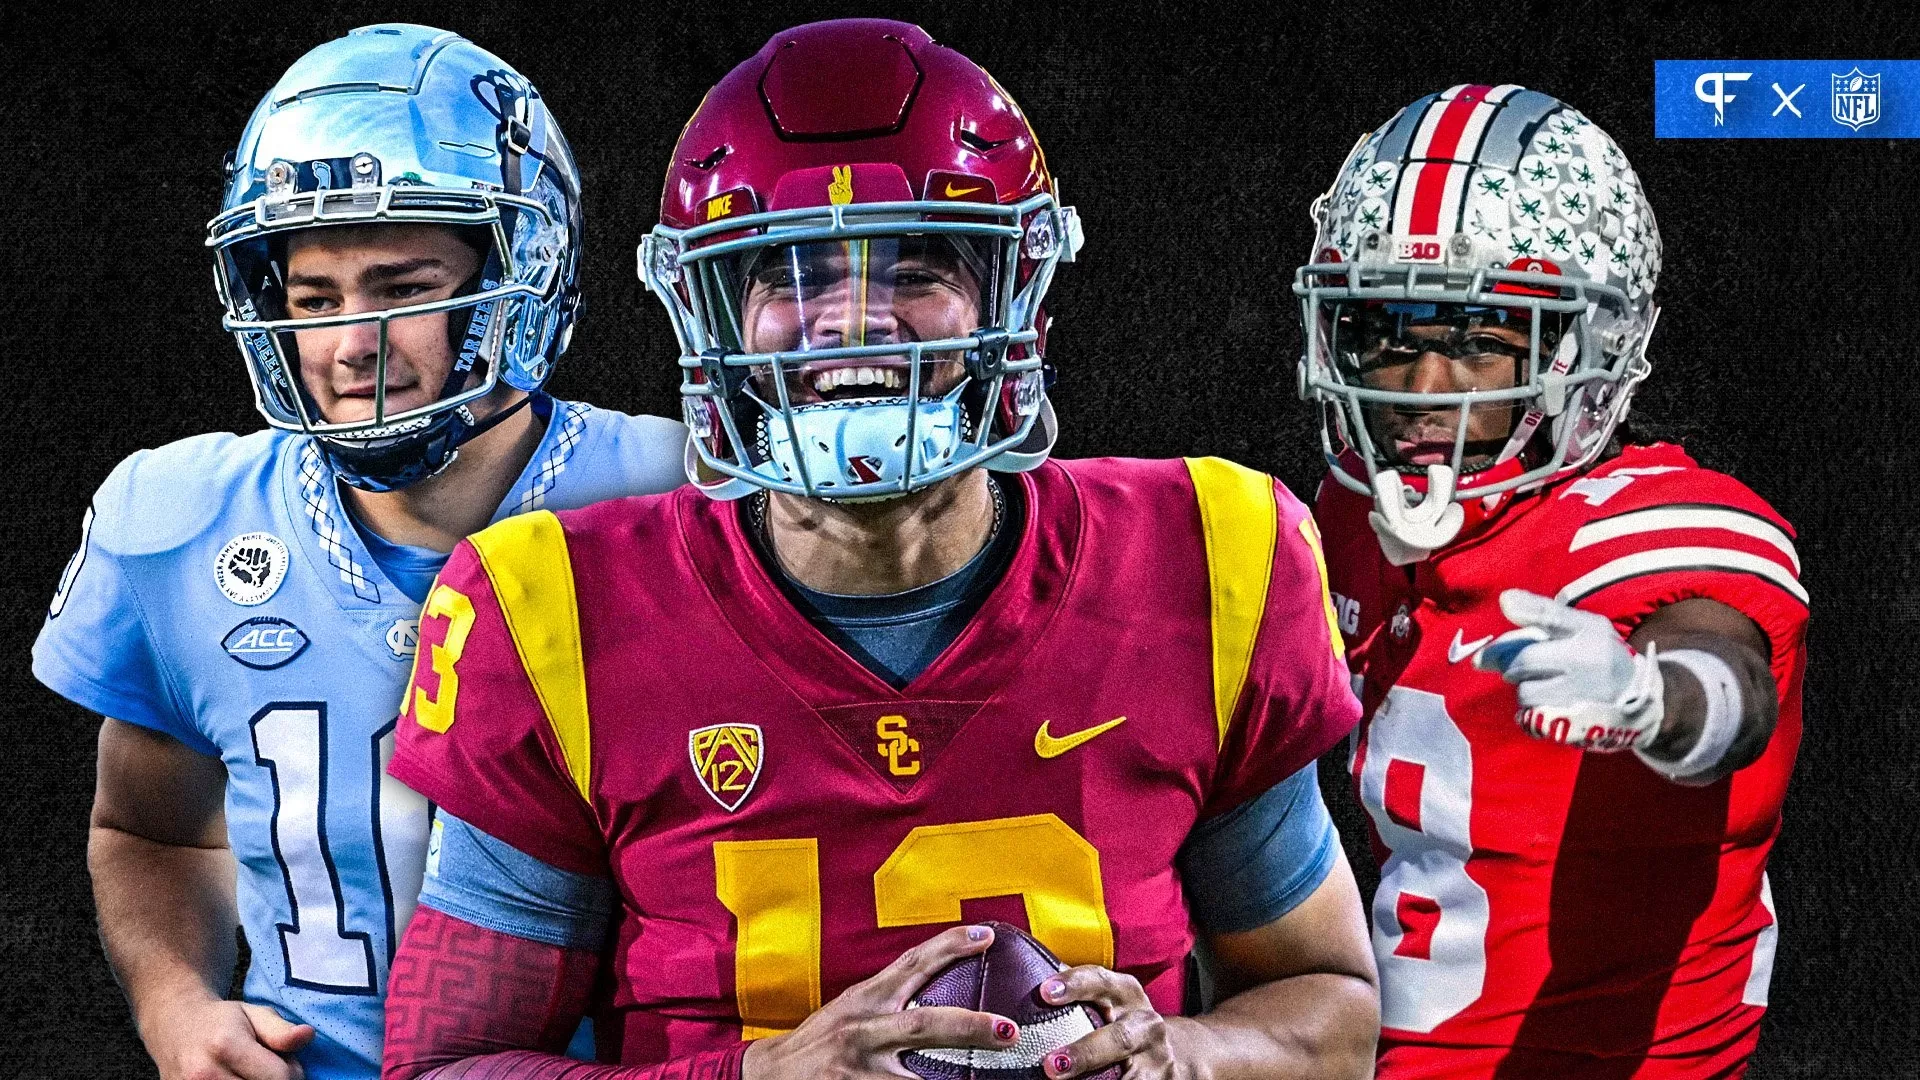 2024 NFL Draft: Analyzing the Top Offensive Prospects - Early Strengths and Weaknesses at Each Position